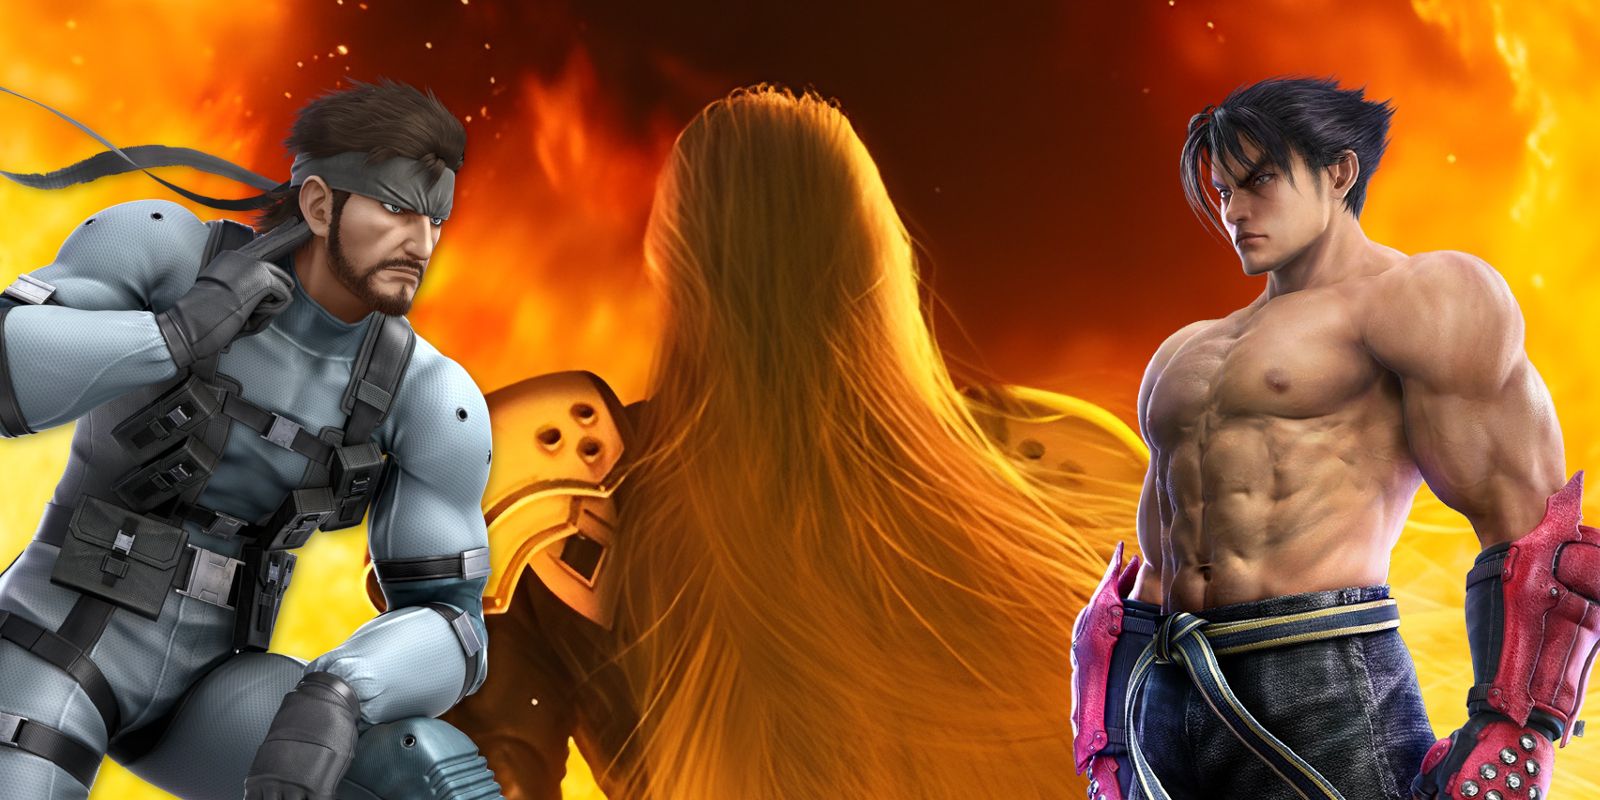 Collage image of Solid Snake, Sephiroth with his back turned, and Jin Kazama